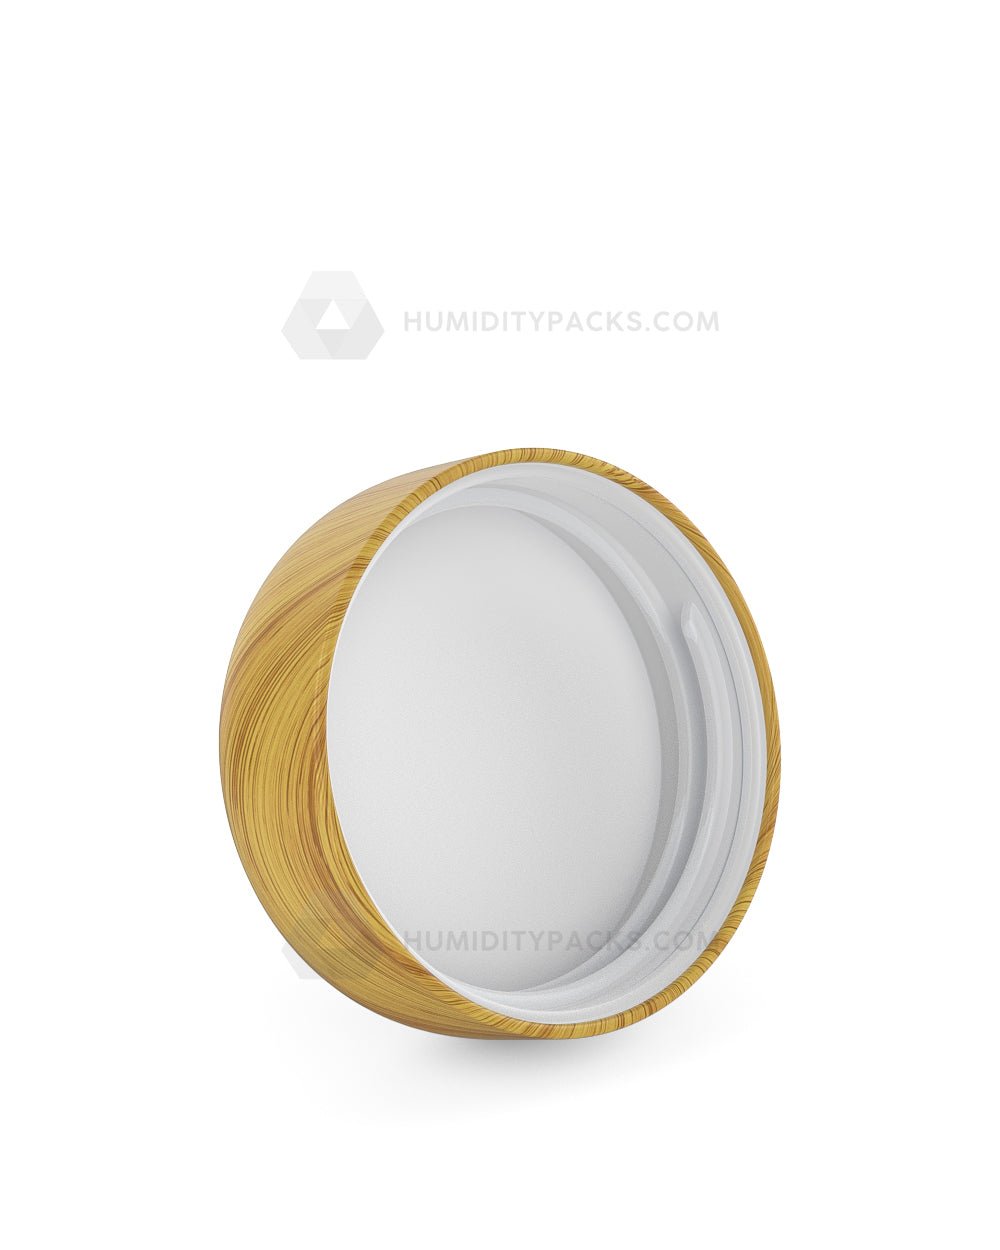 53mm Push and Turn Dome Child Resistant Plastic Caps With Foam Liner - Bamboo Wood - 120/Box Humidity Packs - 2